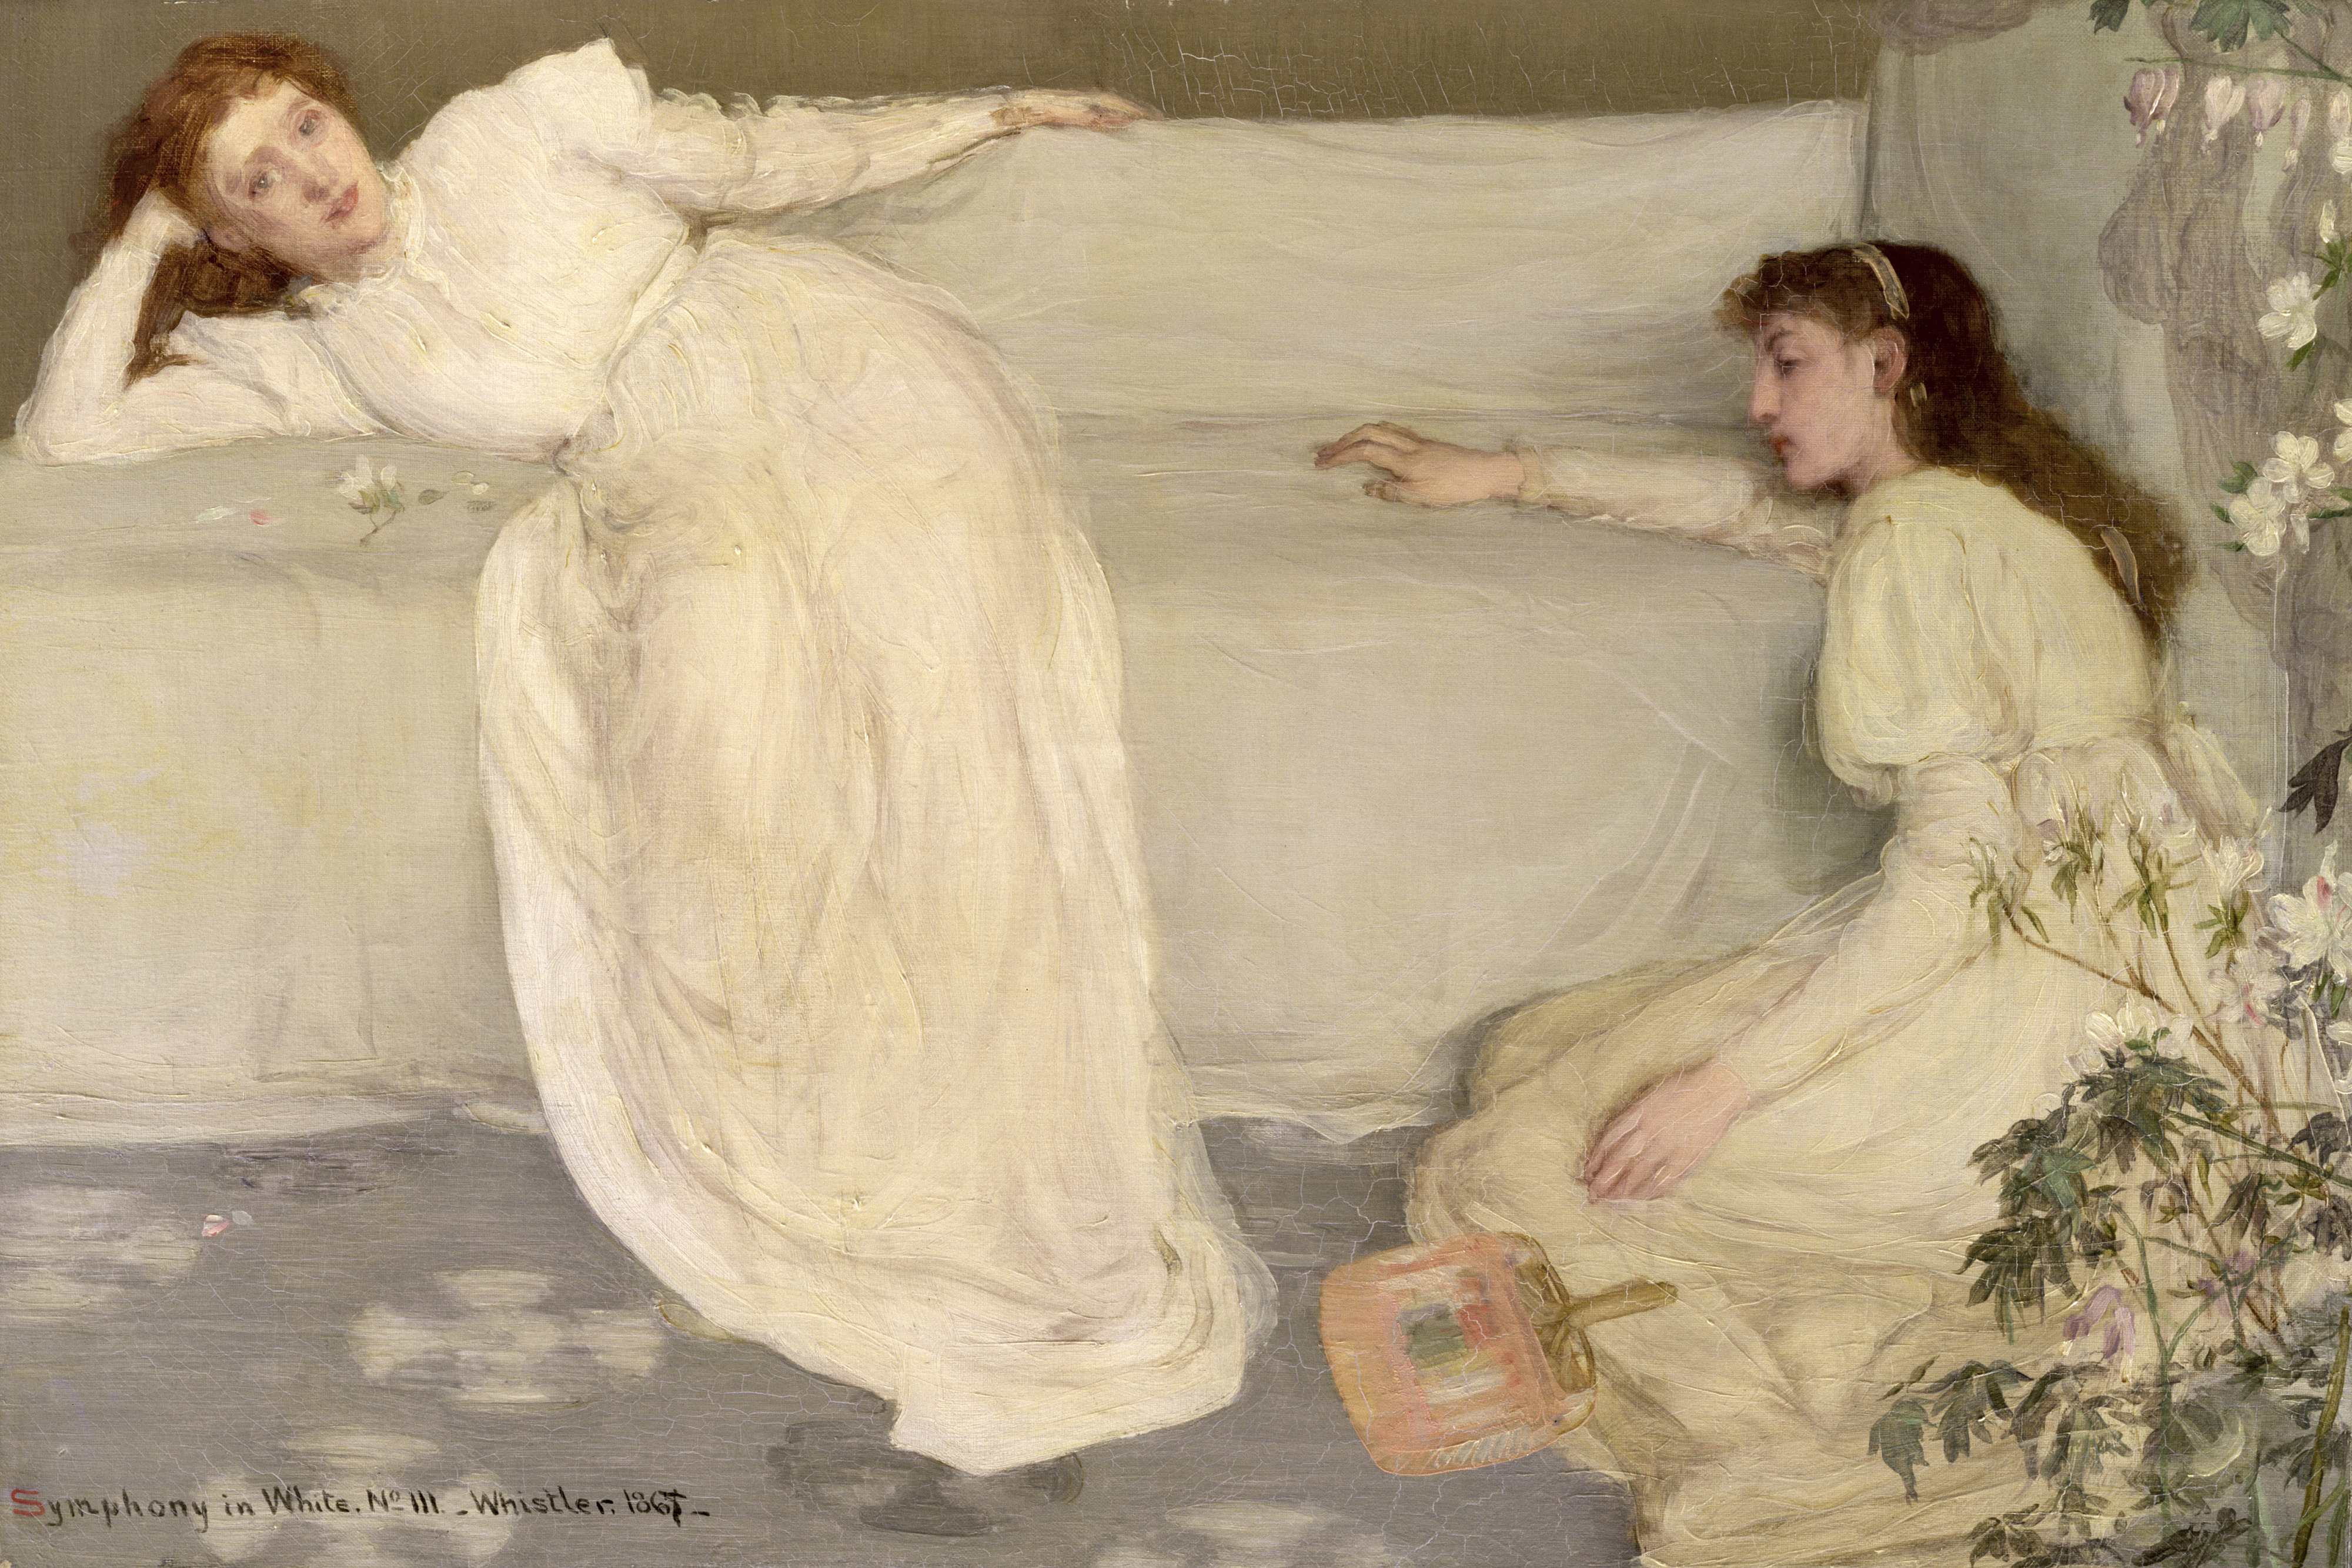 James McNeill Whistler, ‘Symphony in White, No. 3,’ 1865–1867. Oil on canvas. Overall: 51 by 76.5cm (20 1/16 by 30 1/8in), framed: 86 by 112 by 6.7cm (33 7/8 by 44 1/8 by 2 5/8in). The Henry Barber Trust, The Barber Institute of Fine Arts, University of Birmingham Bridgeman Images 